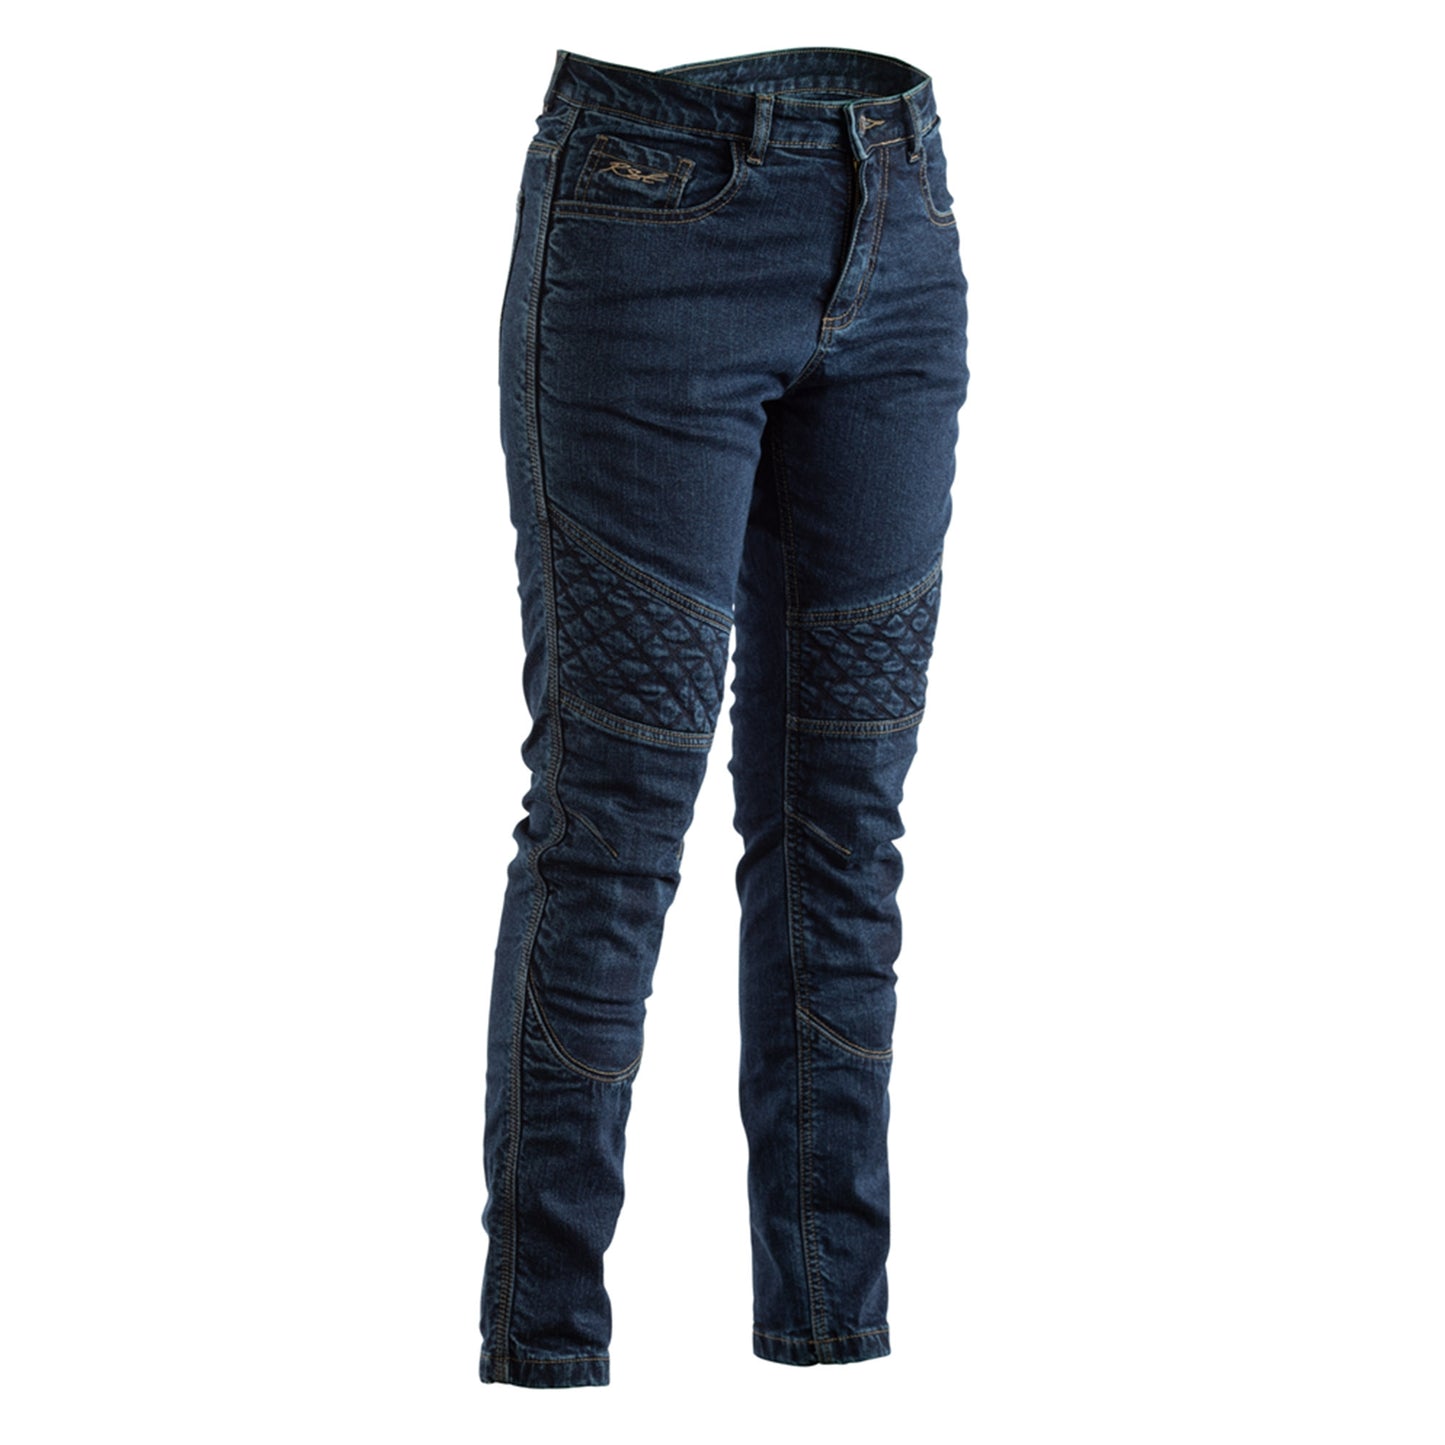 RST Reinforced Straight Leg (CE) Ladies Jeans - Includes Knee Armour - Short Length - Blue